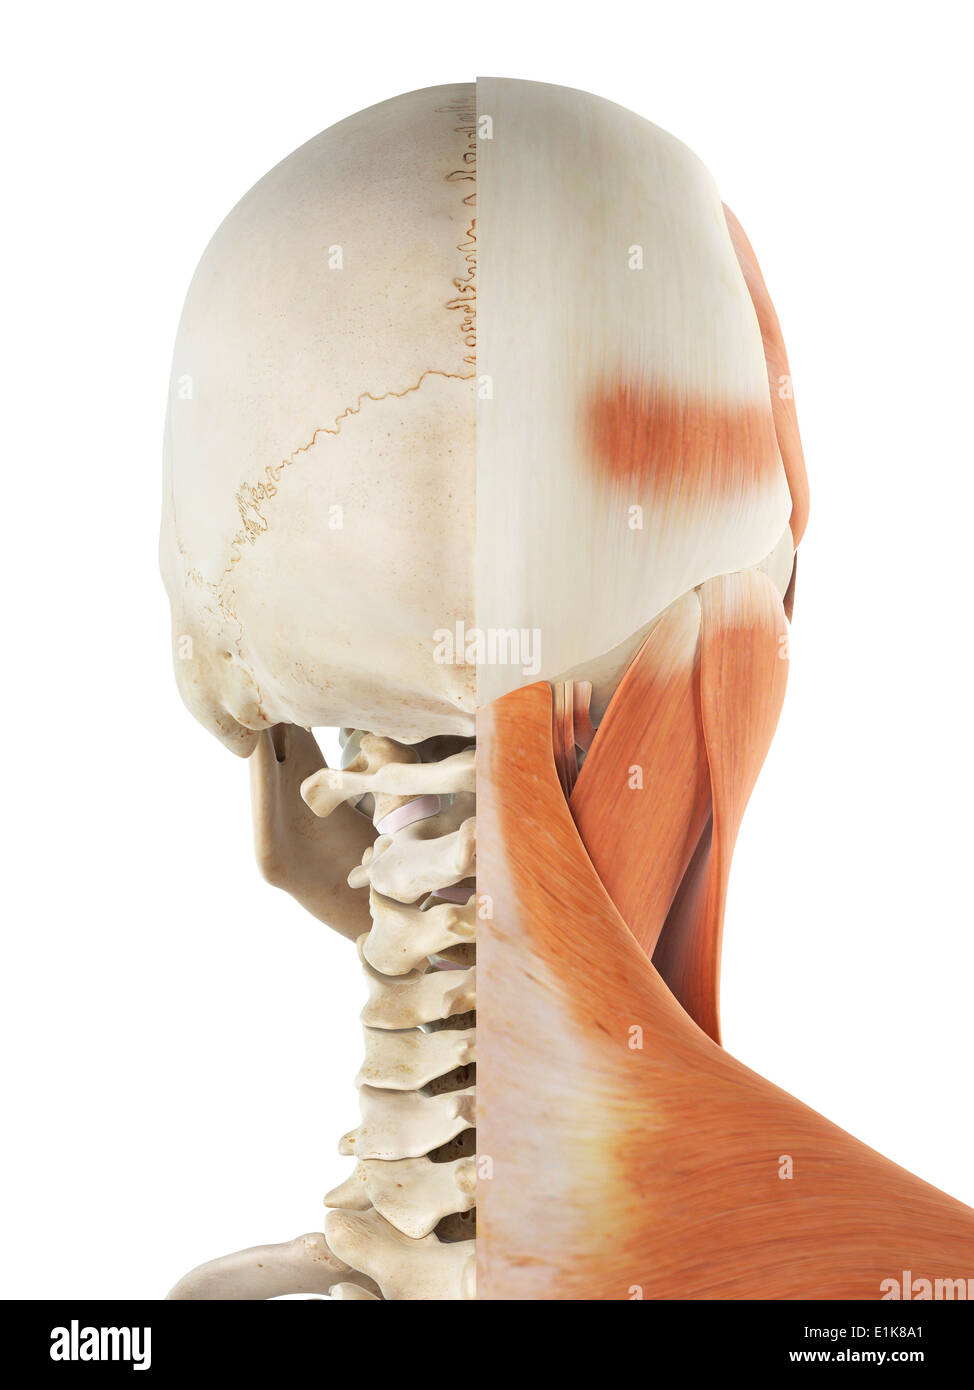 Human muscles in the head and neck cut away computer artwork. Stock Photo